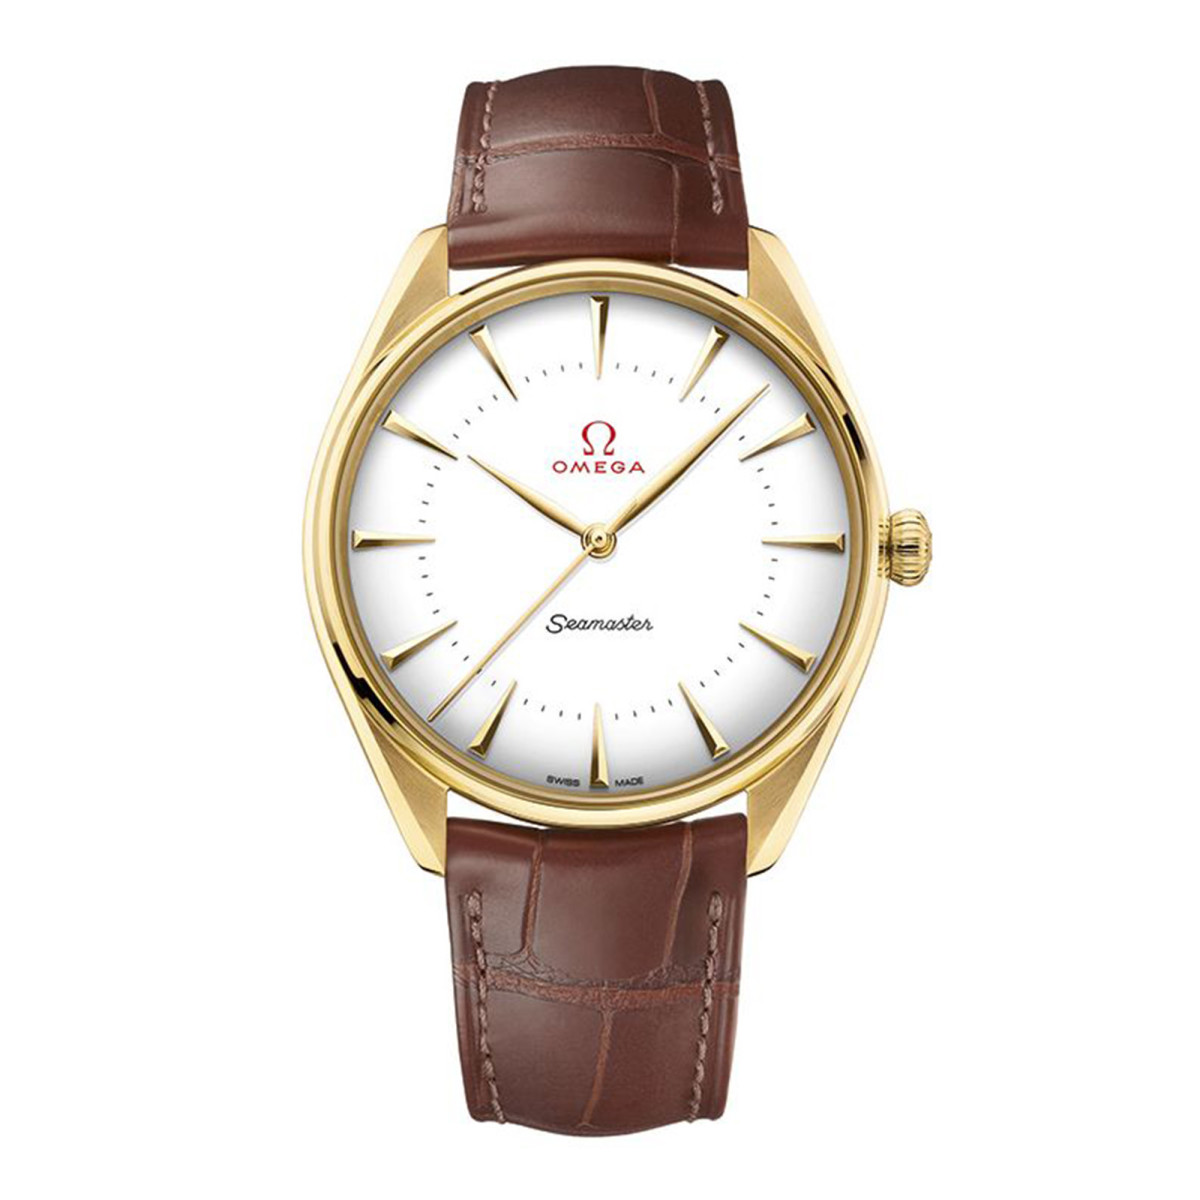 Omega Seamaster Olympic Games Gold Collection